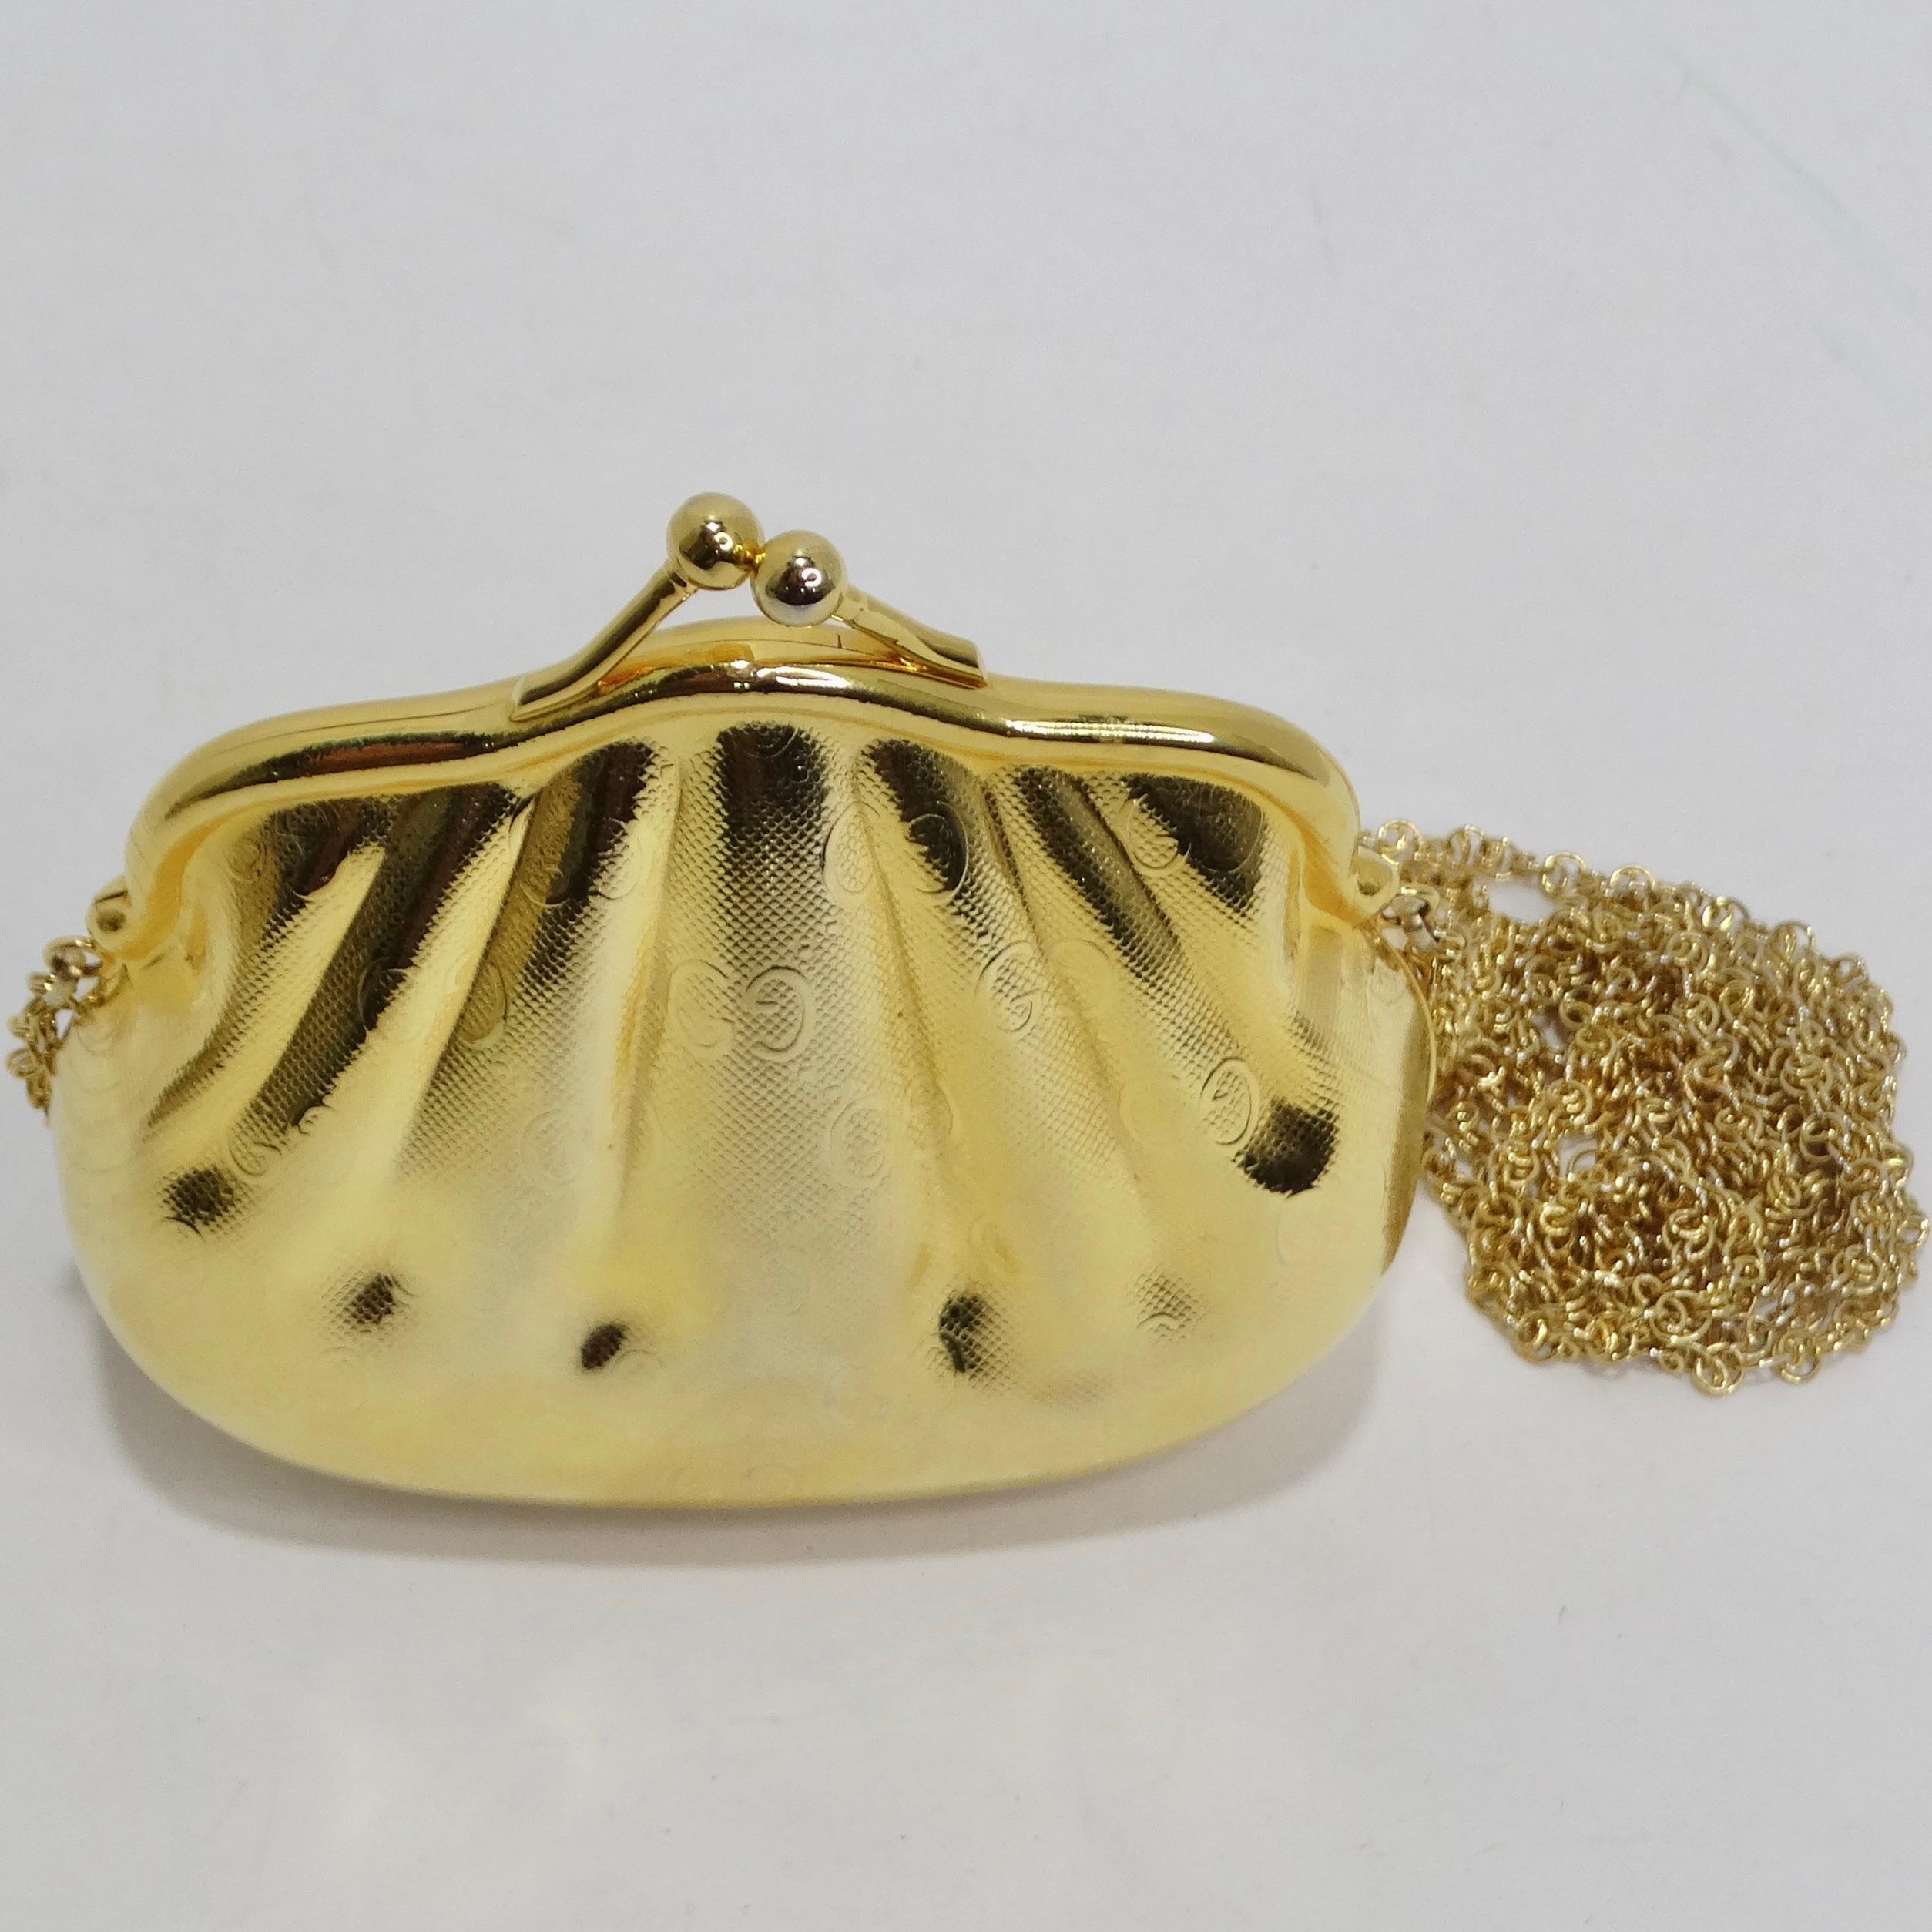 Gucci 1980s Gold Tone Metal Shell Minaudière Evening Bag In Excellent Condition For Sale In Scottsdale, AZ